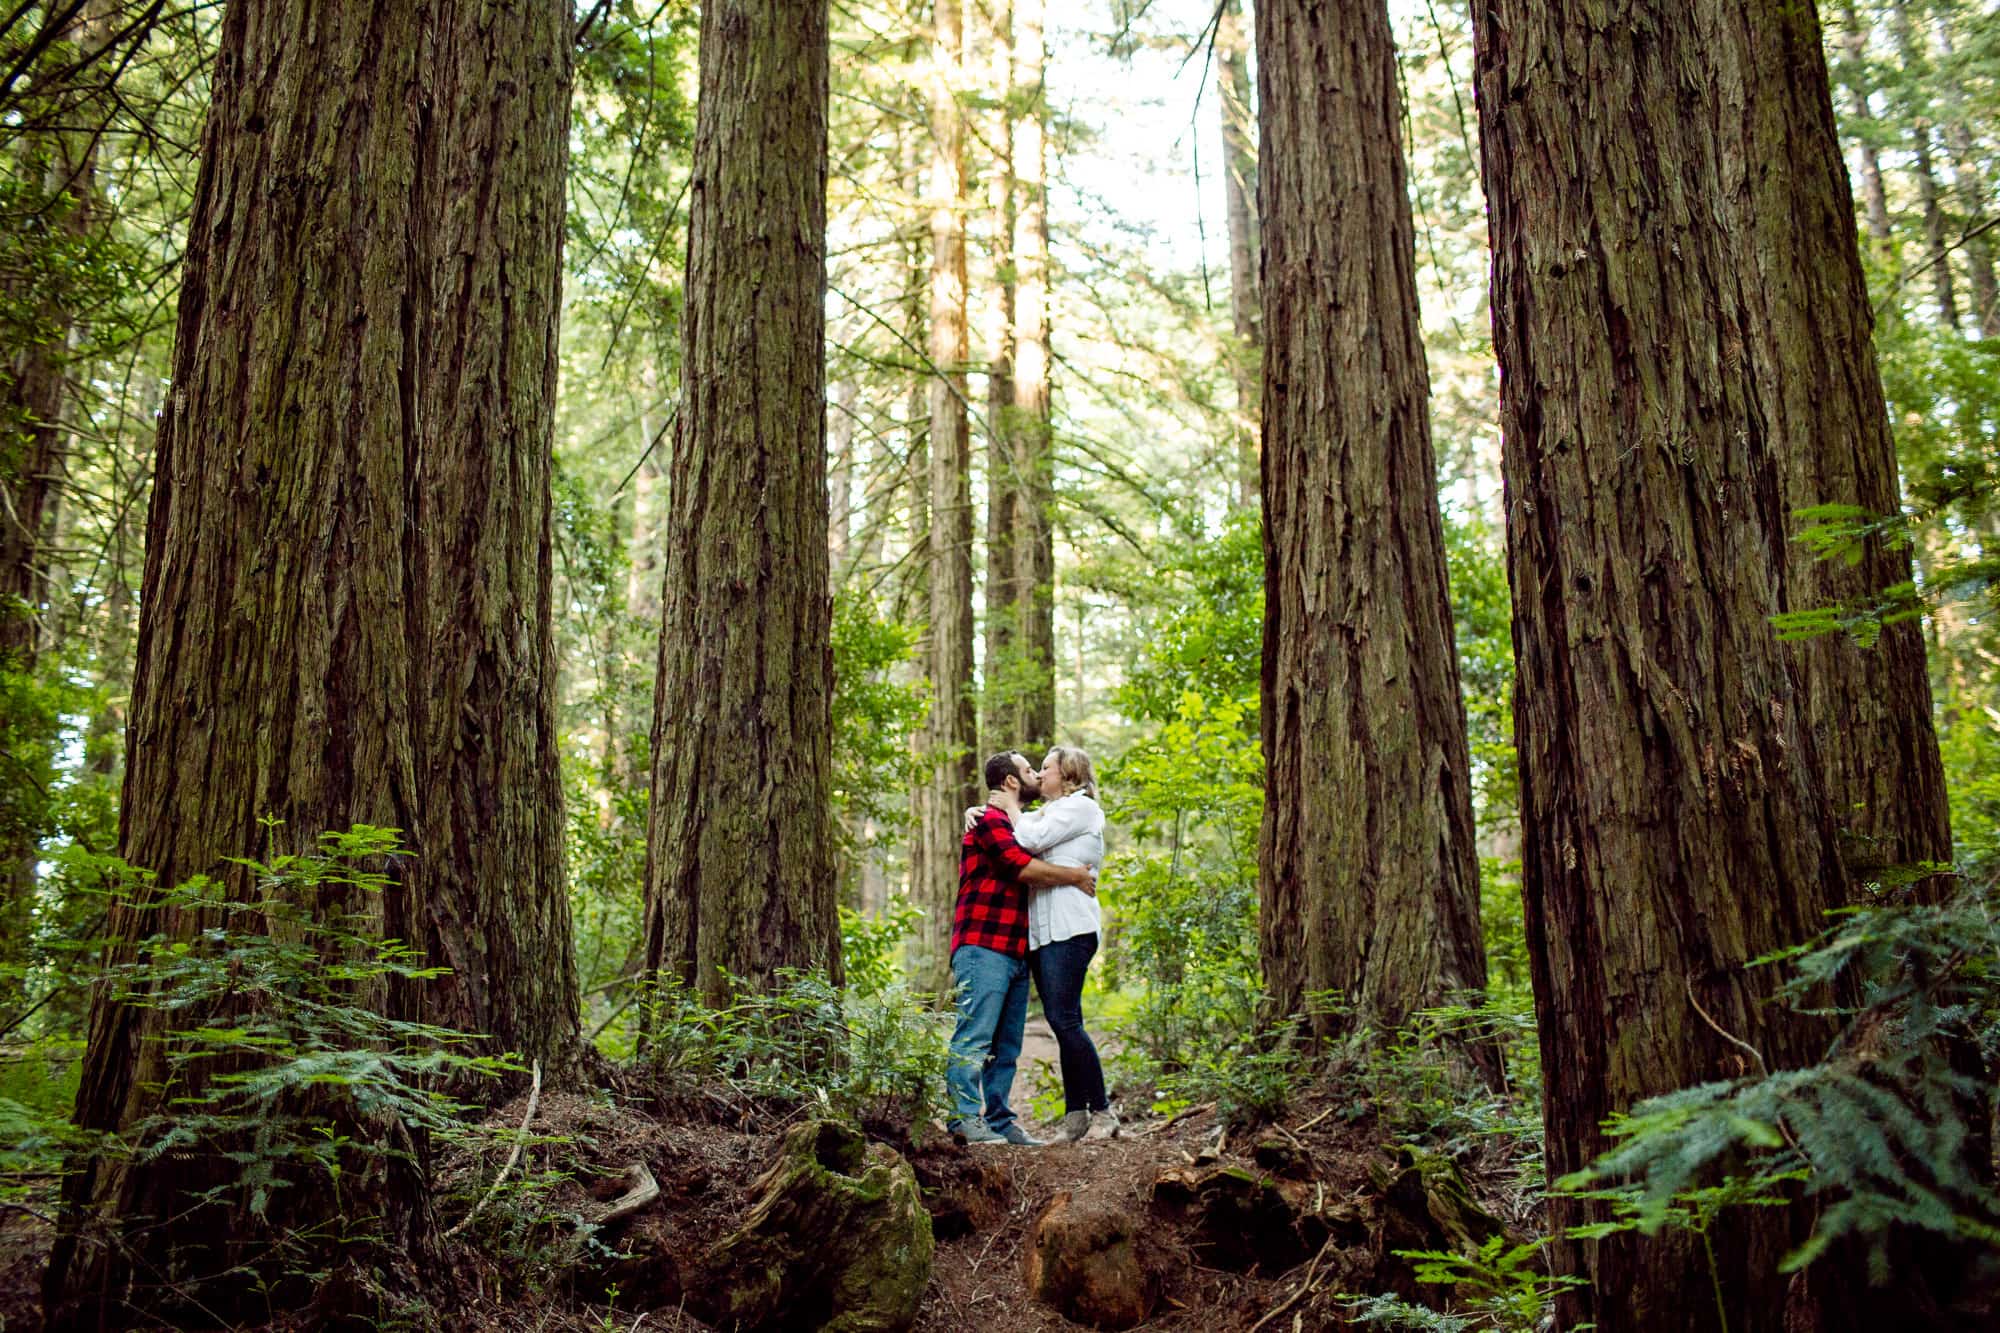 Man and woman embracing outdoors in between four redwood trees